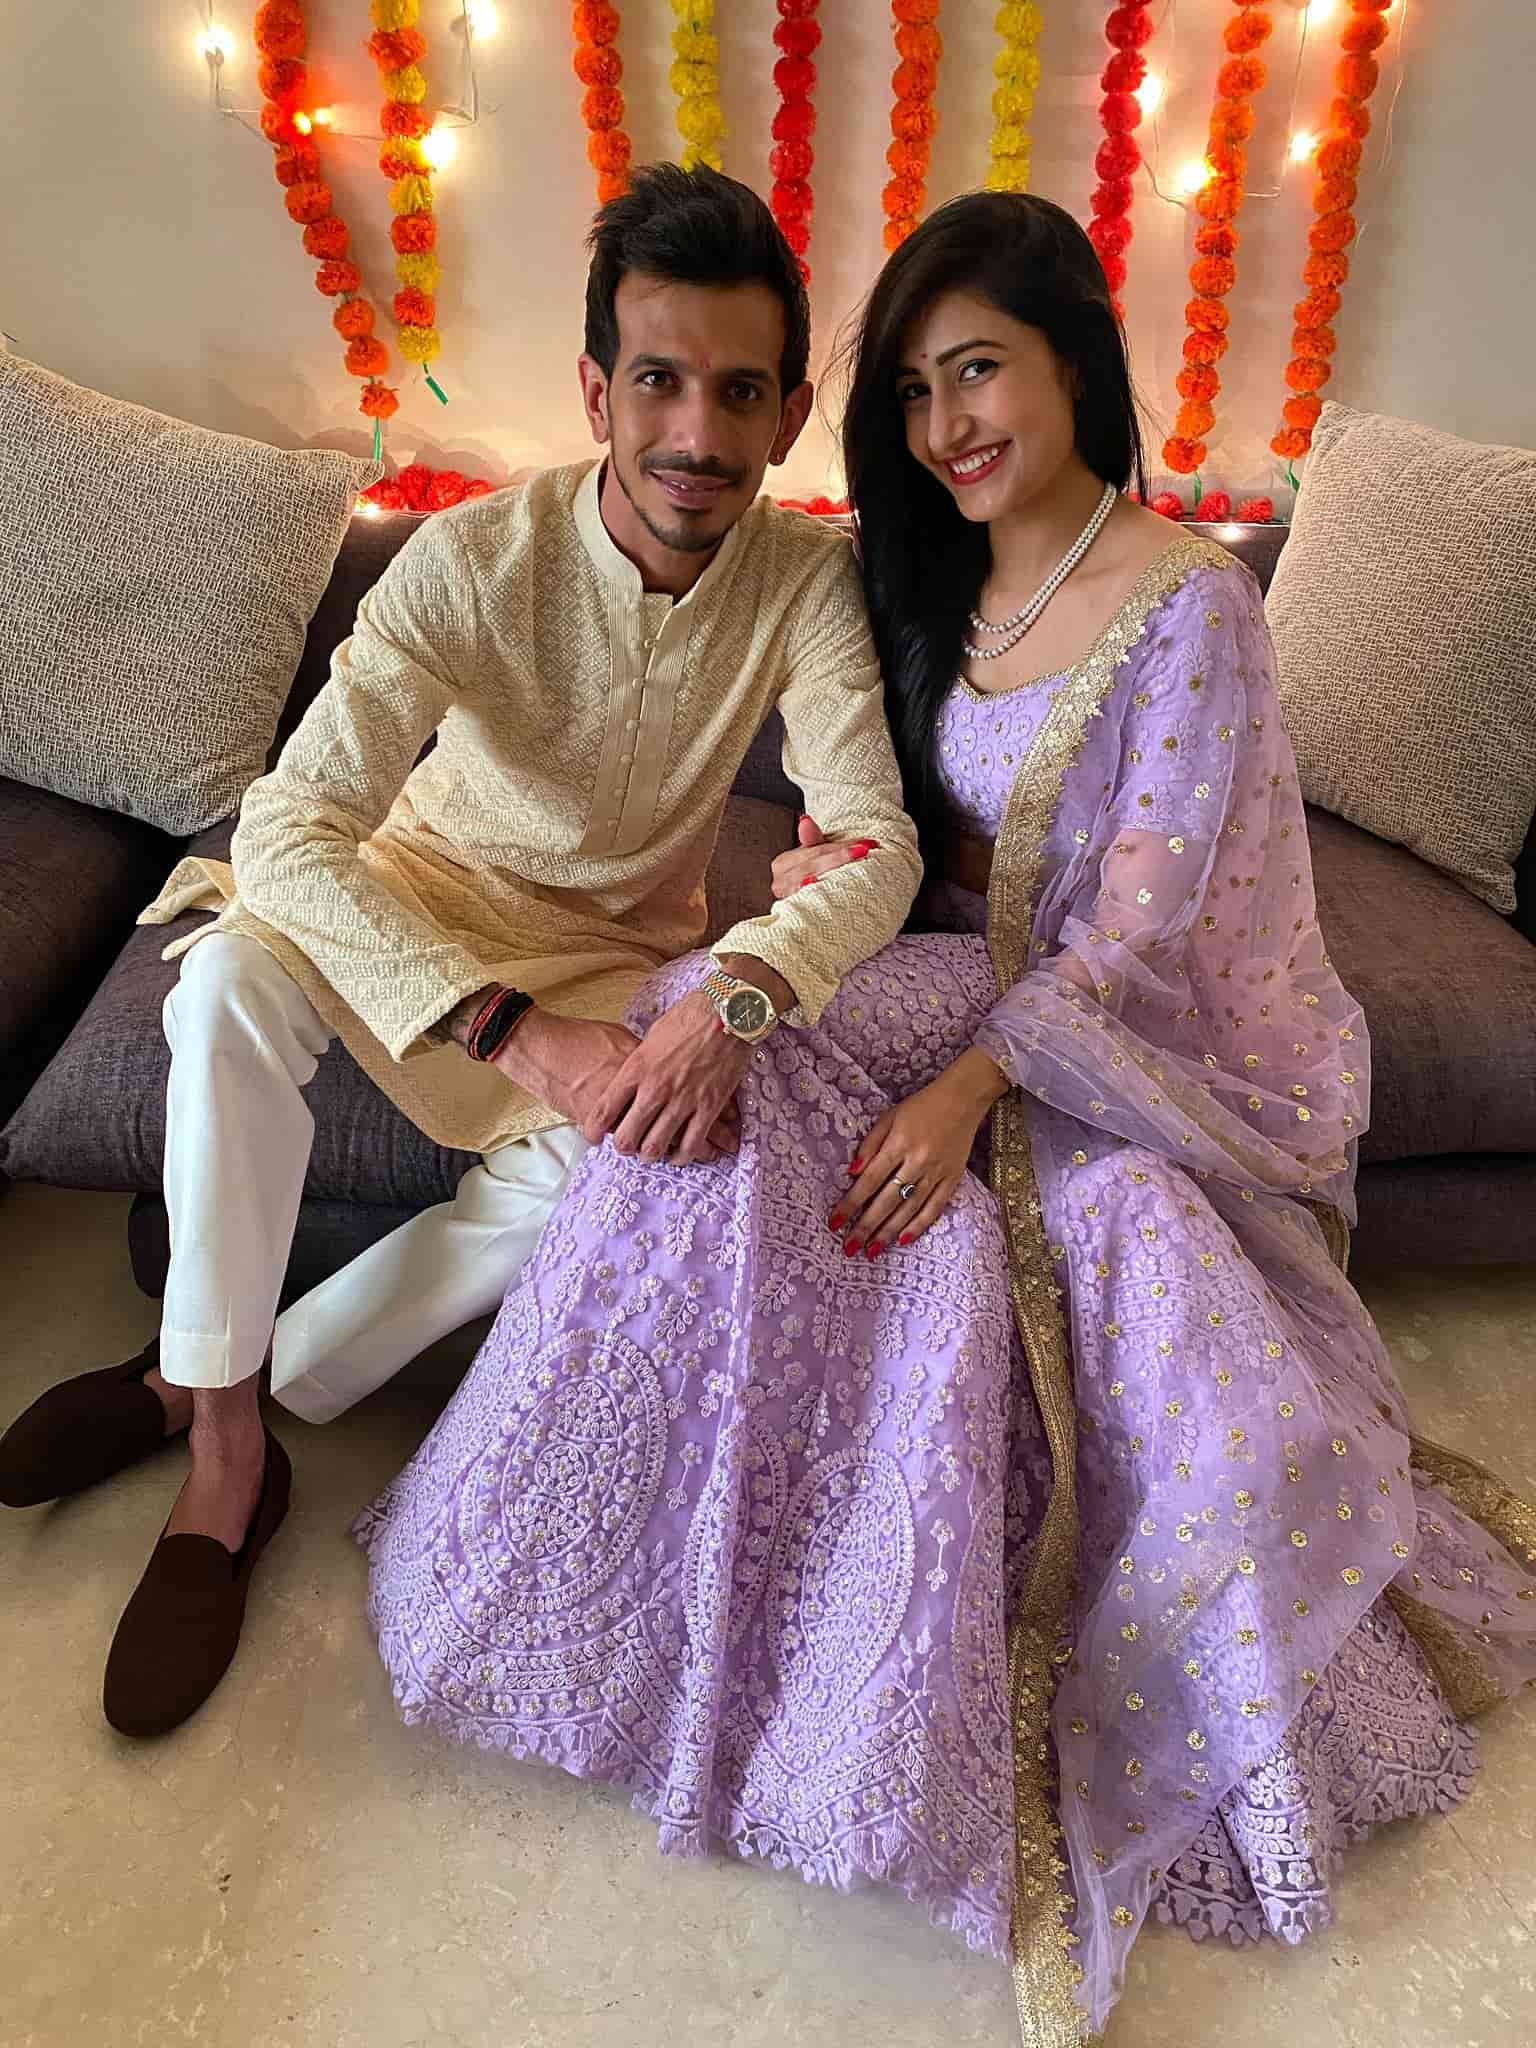 Yuzvendra Chahal and Dhanashree Verma after their marriage in lockdown